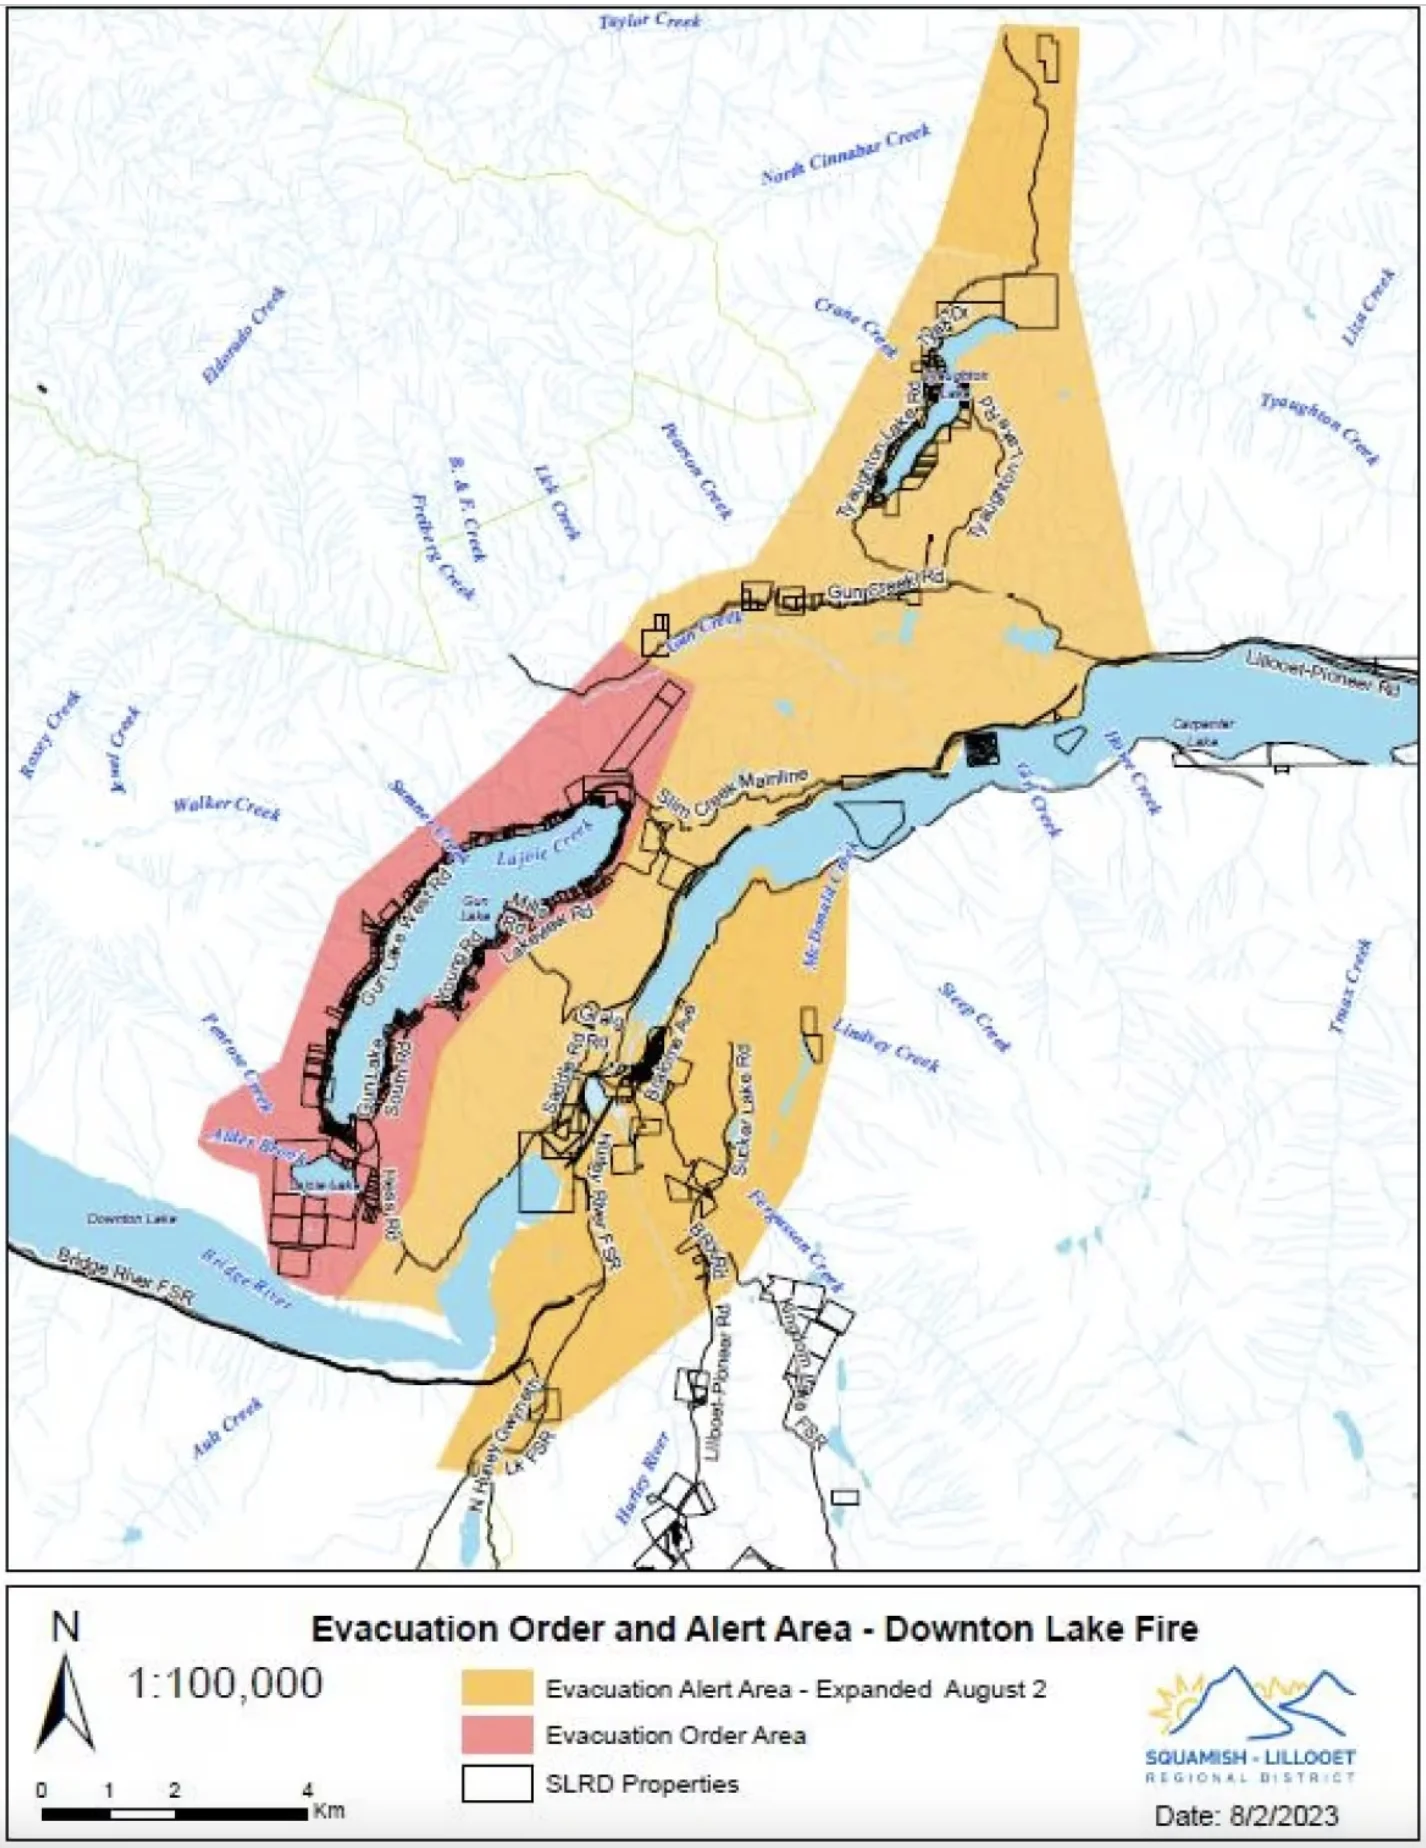 Squamish-Lillooet Regional District: An evacuation alert due to the Downton Lake wildfire was extended Wednesday to include the nearby town of Gold Bridge, as well as further areas north of the blaze. (Squamish-Lillooet Regional District)